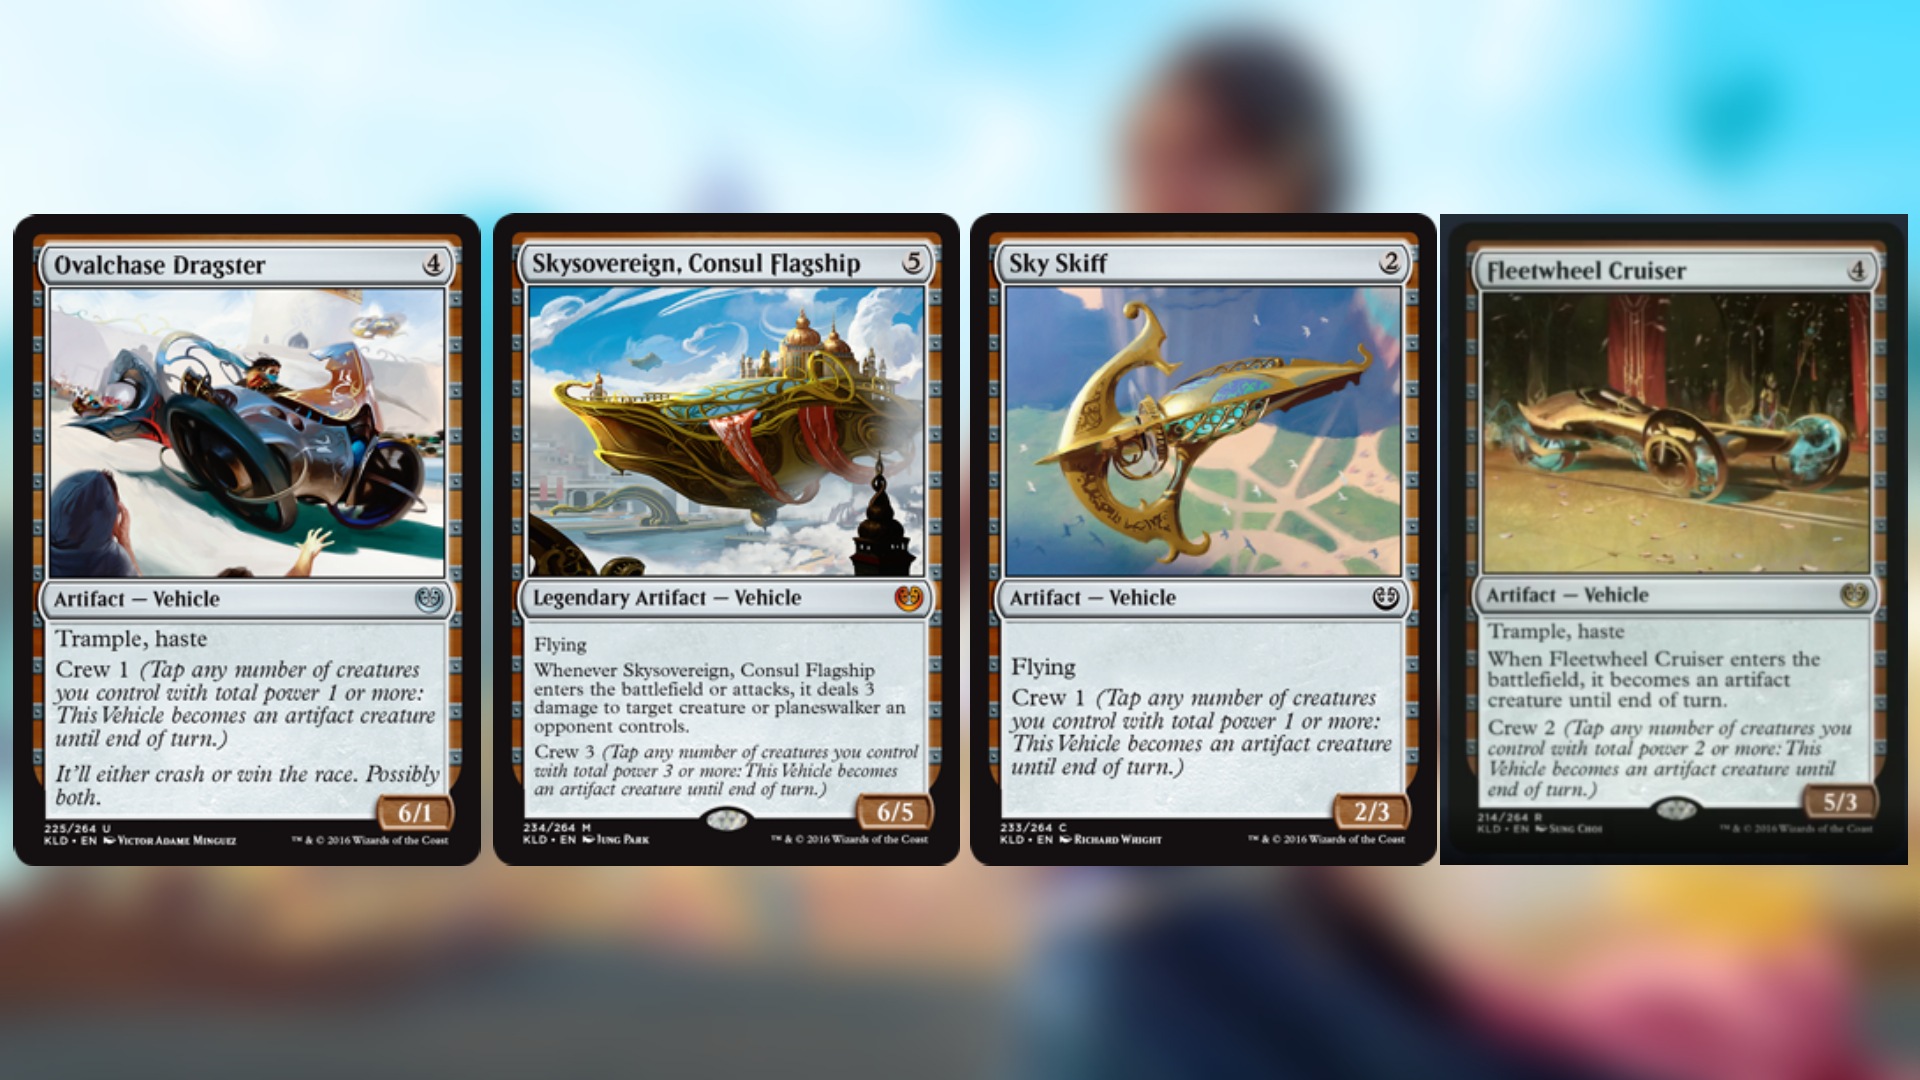 magic the gathering cards four in a row all featuring different strangely designed vehicles from boats to cars and flying machines